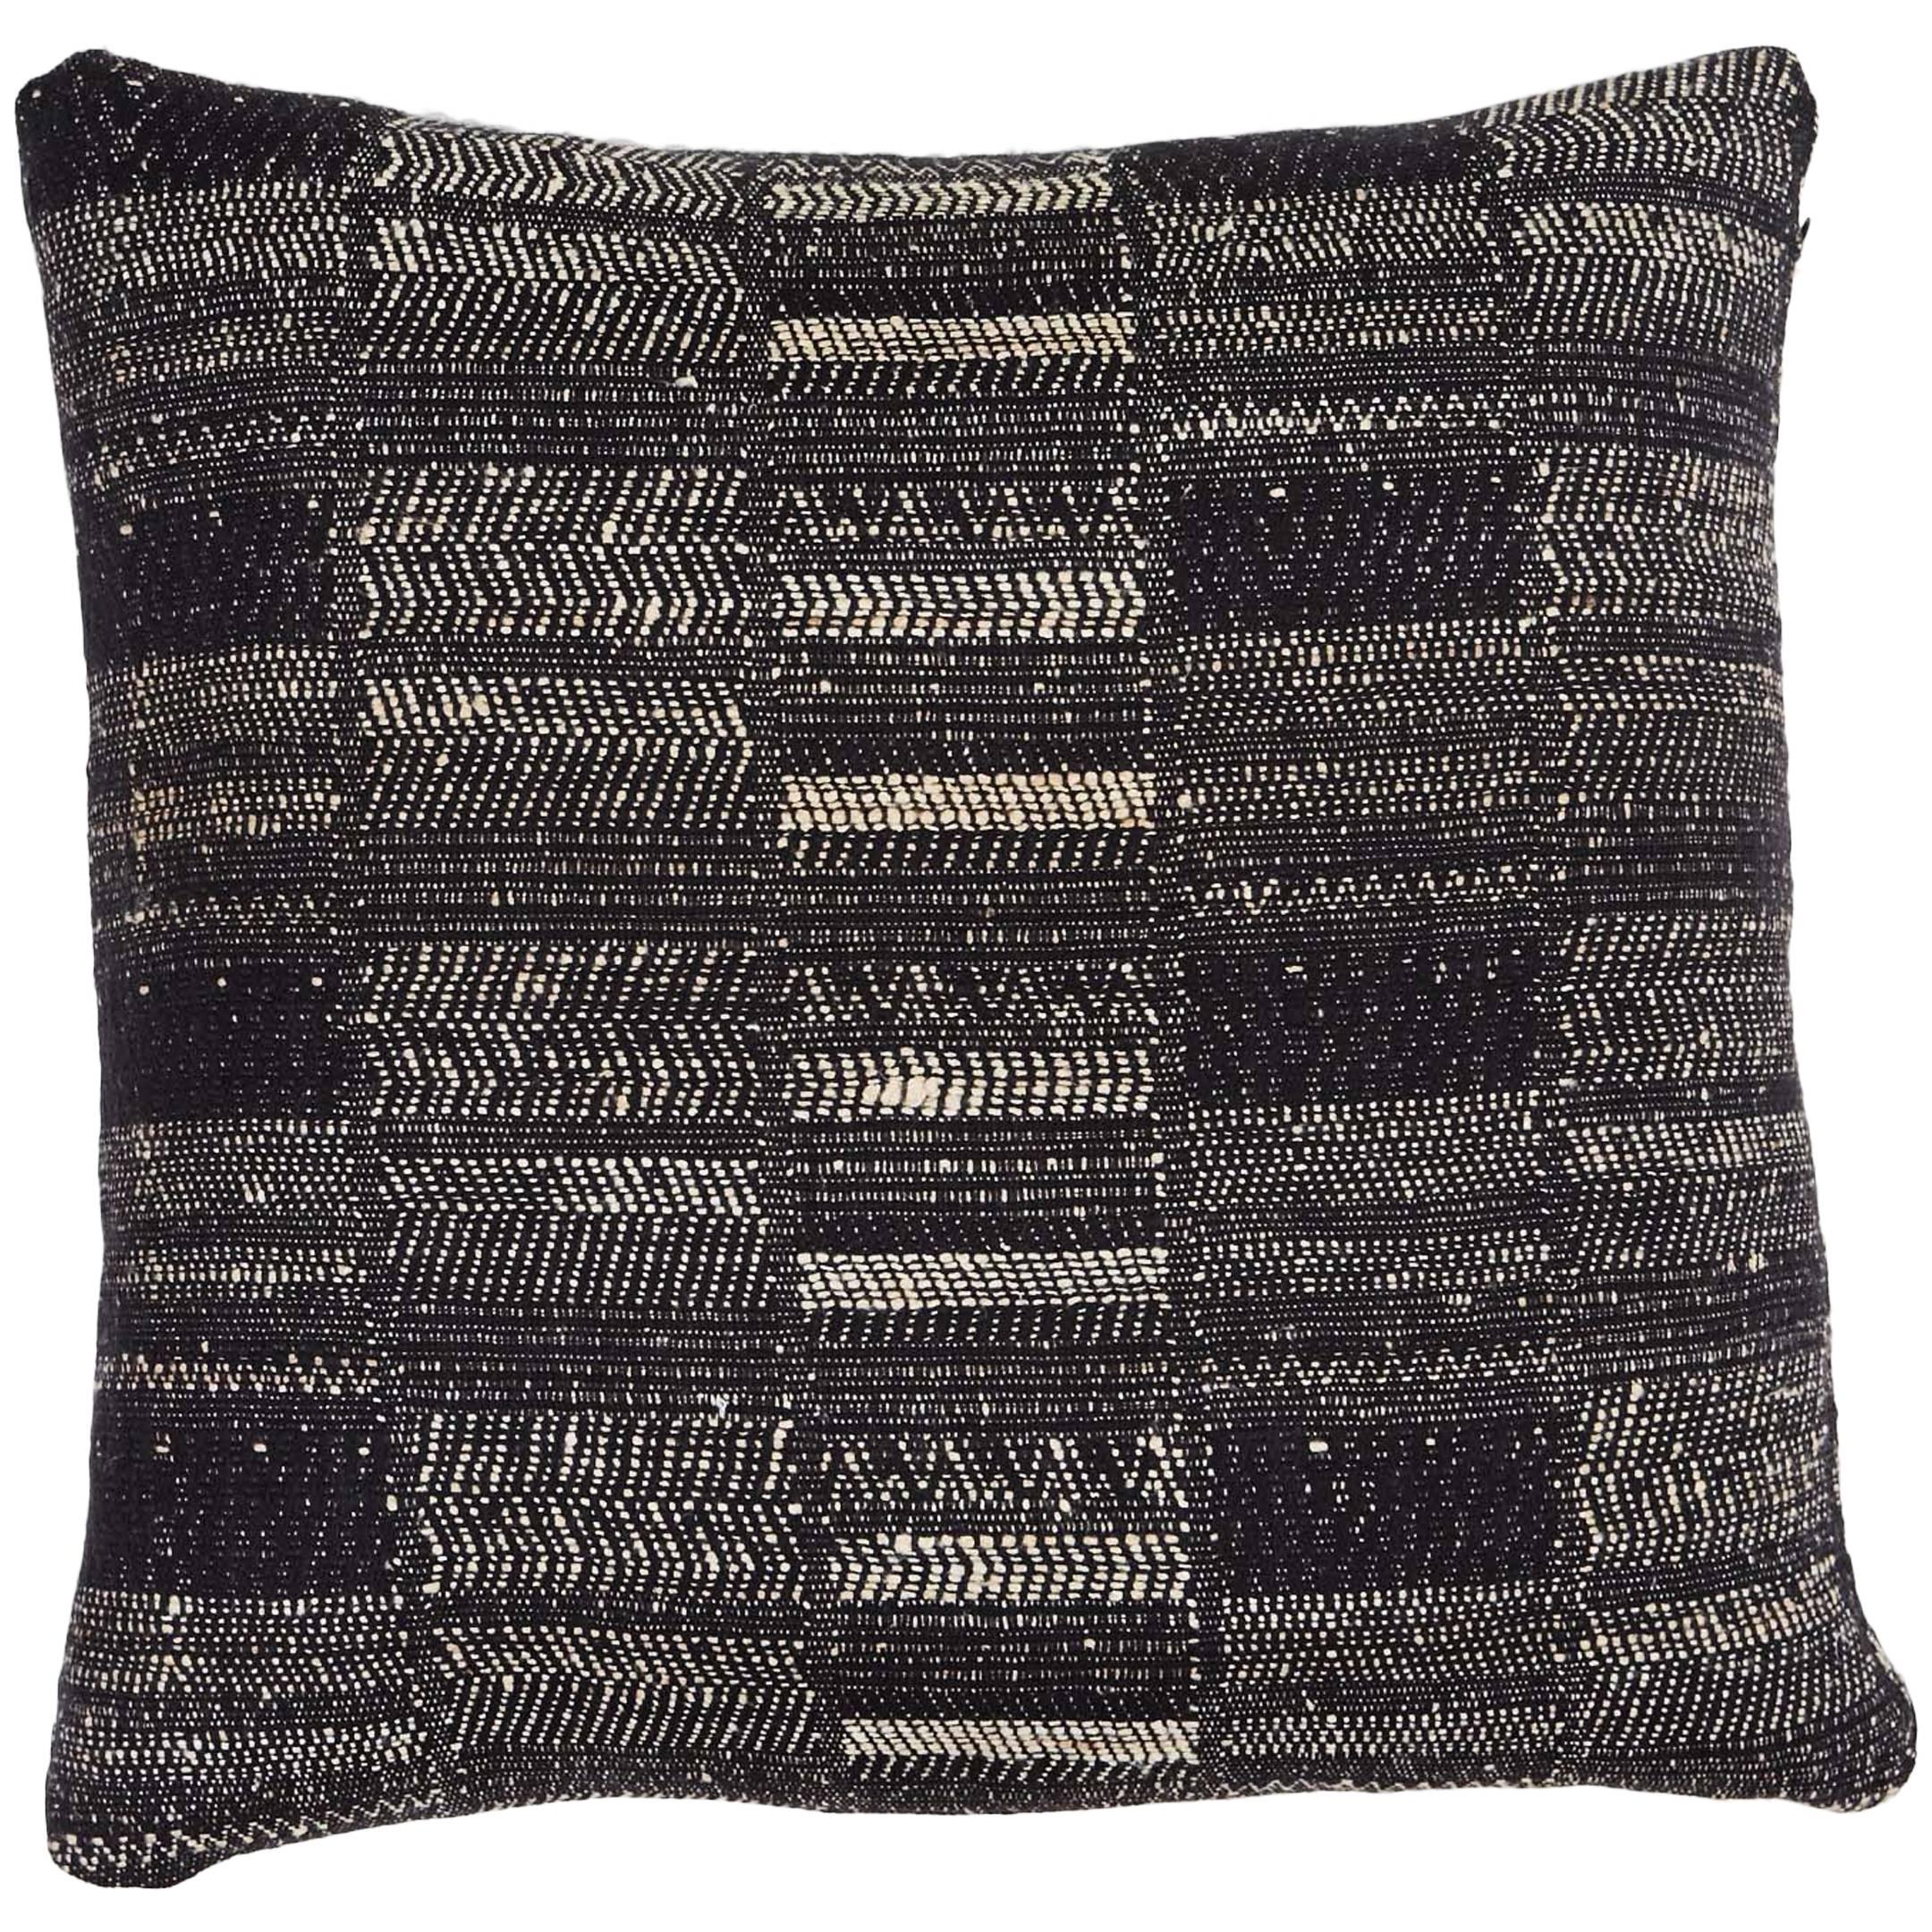 Indian Handwoven Pillow in Black and Ivory